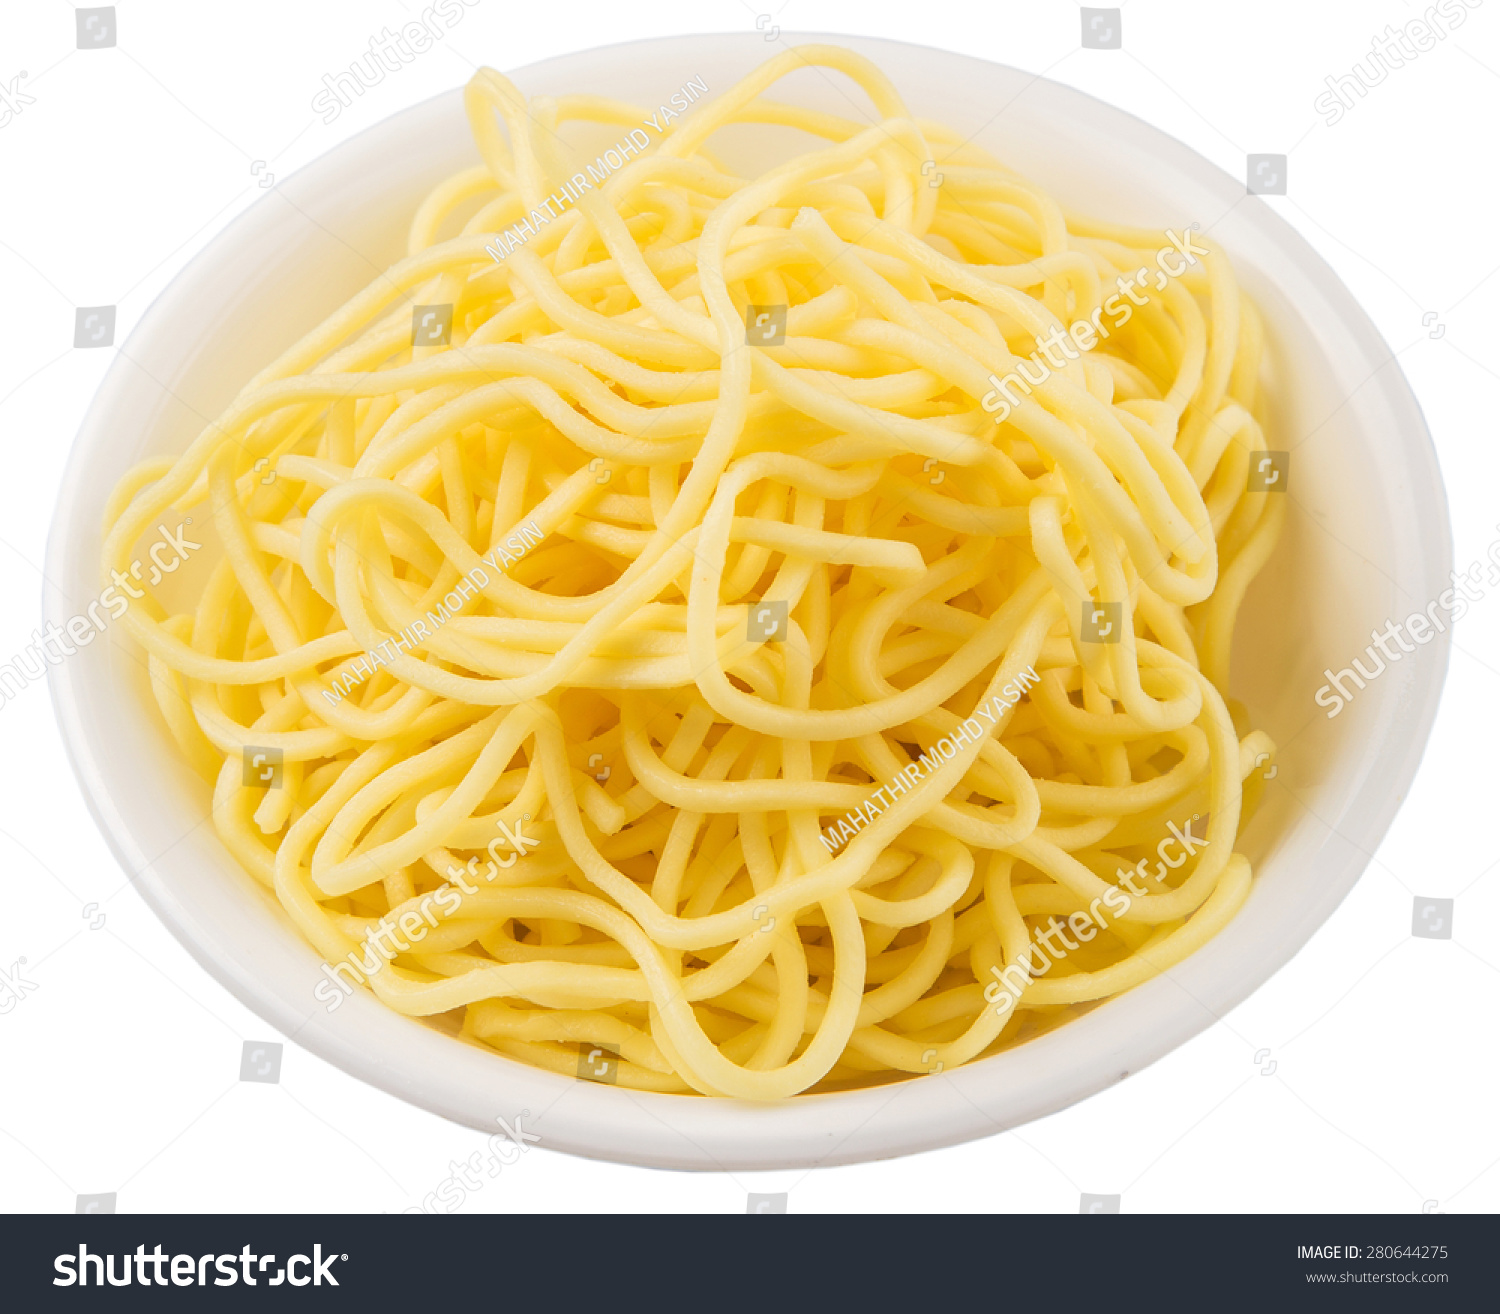 Download Raw Long Chinese Yellow Noodles White Stock Photo Edit Now 280644275 Yellowimages Mockups